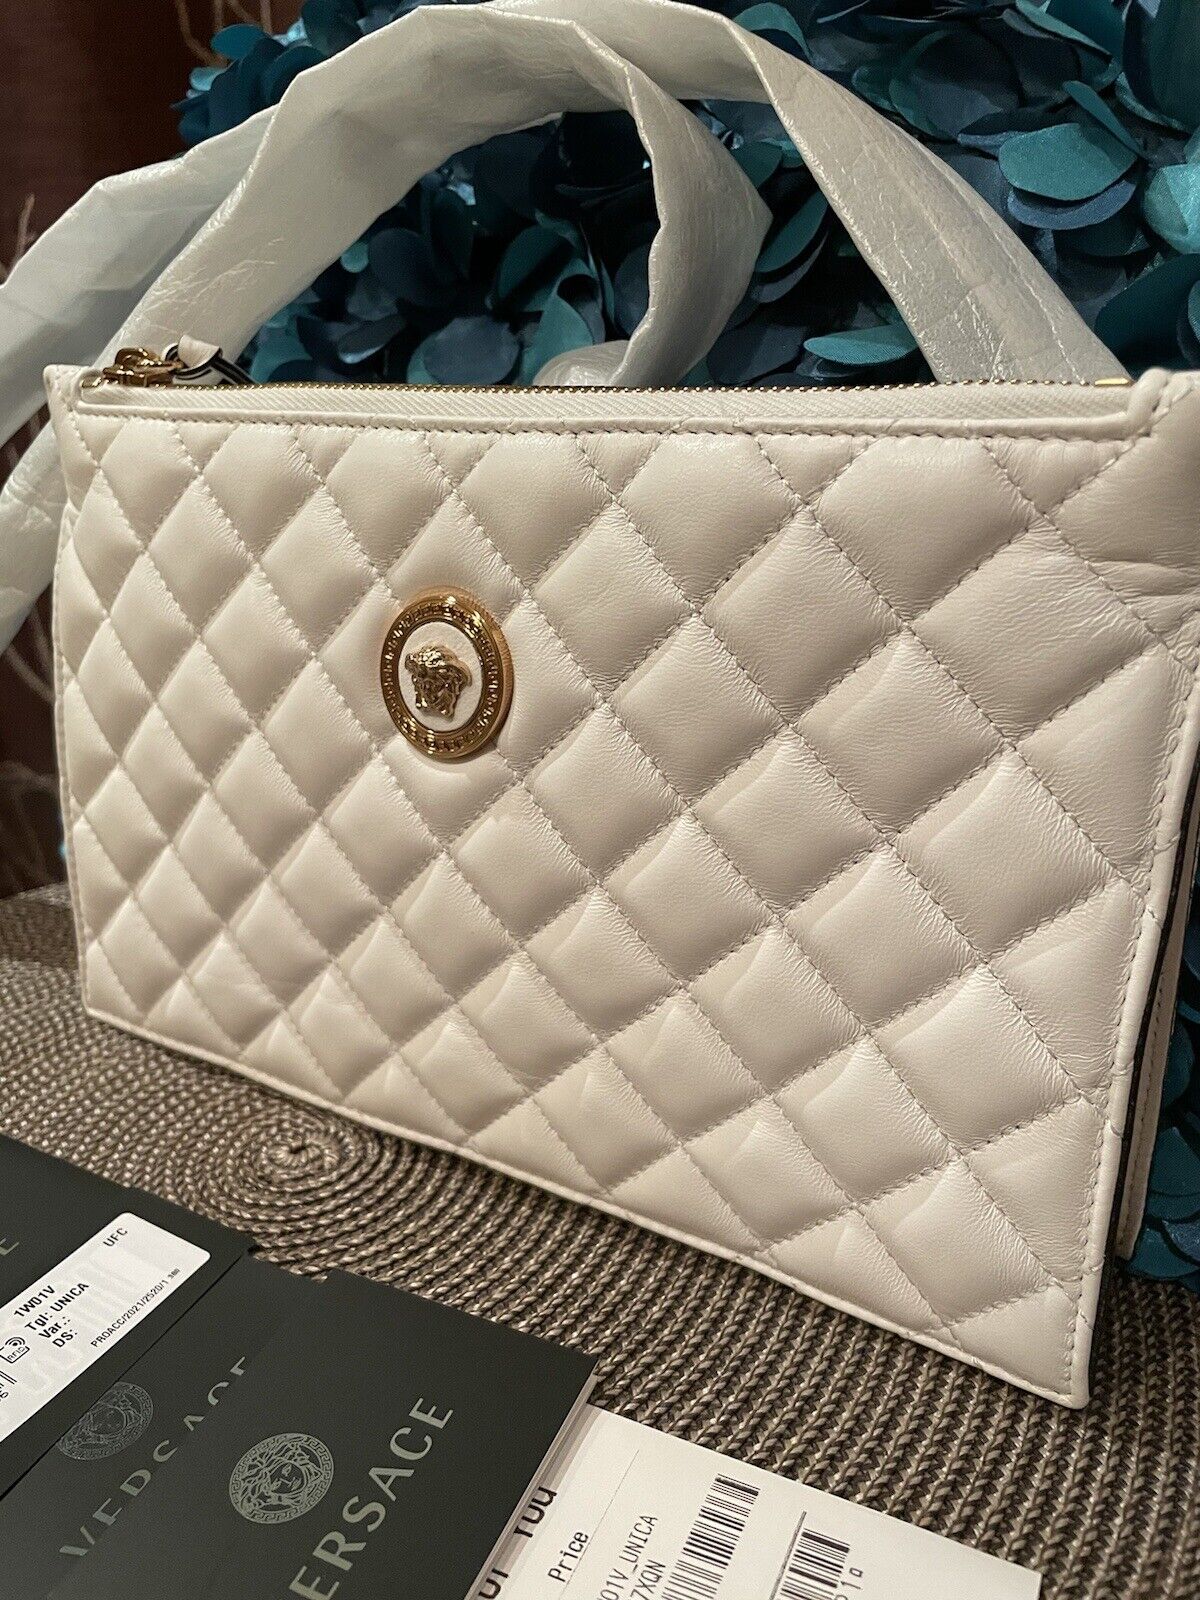 BNWT Versace Medusa Tribute Nappa Leather Shoulder Bag Crossbody White Quilted